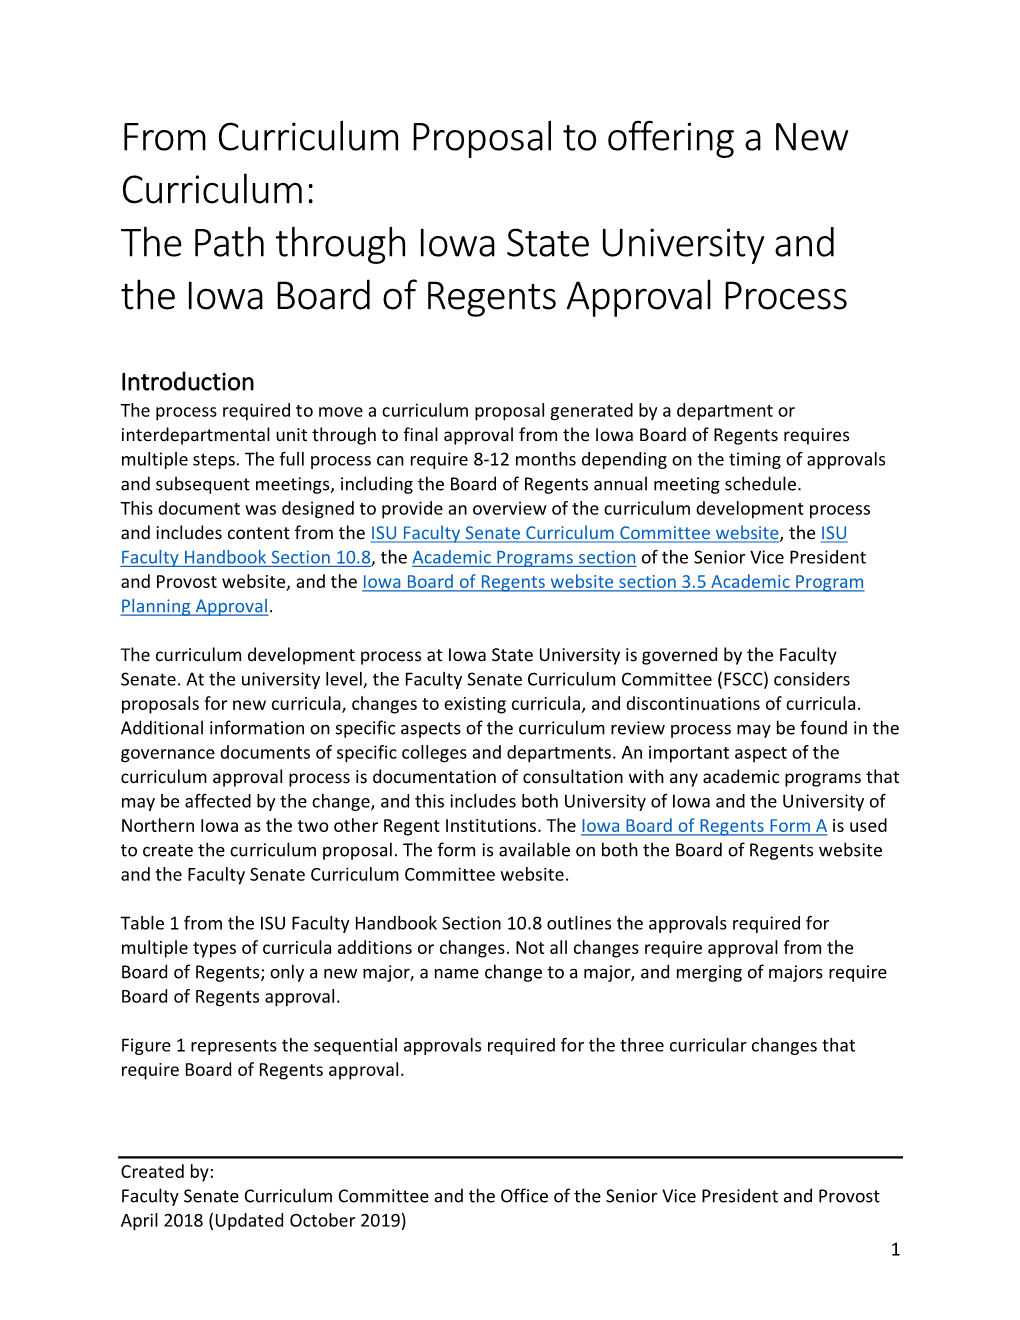 From Curriculum Proposal to Offering a New Curriculum: the Path Through Iowa State University and the Iowa Board of Regents Approval Process